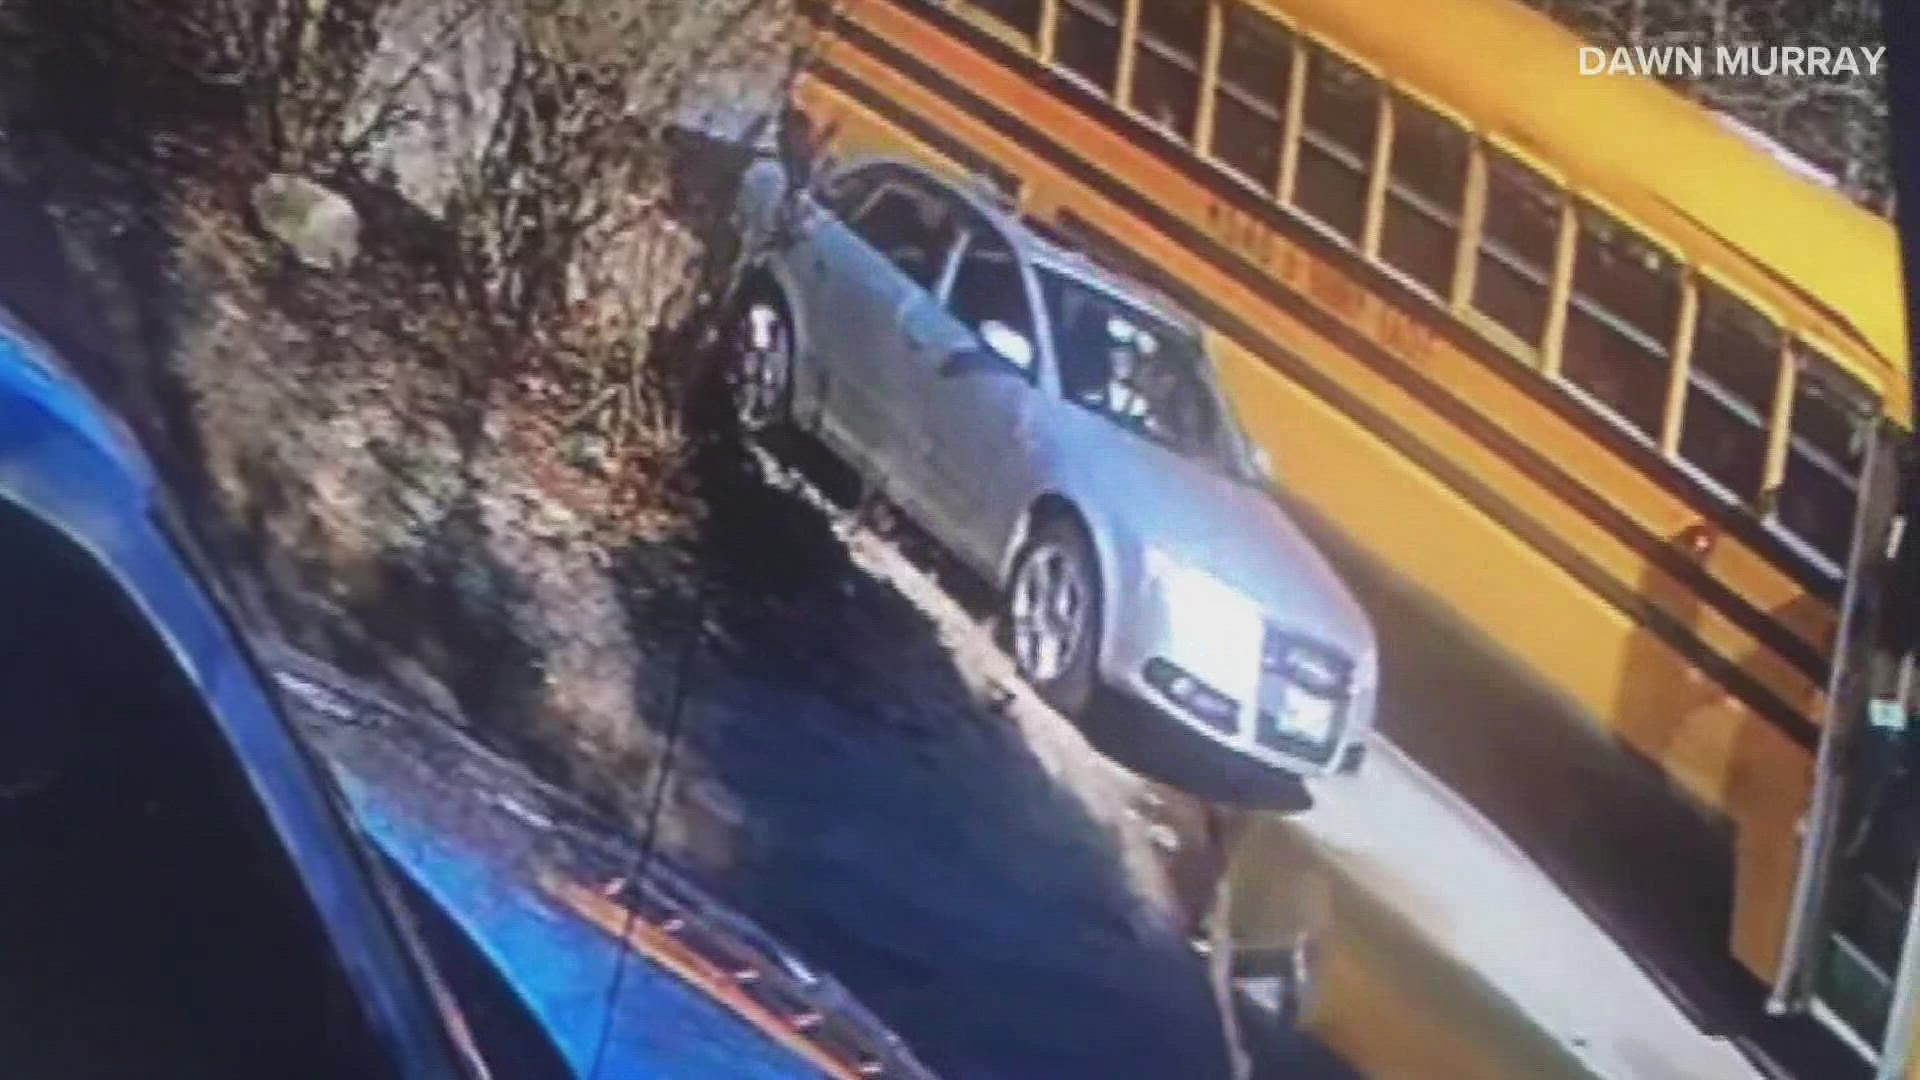 MSAD 6 Superintendent Paul Penna said the bus driver saw the car and stopped a student from exiting the bus just in time.